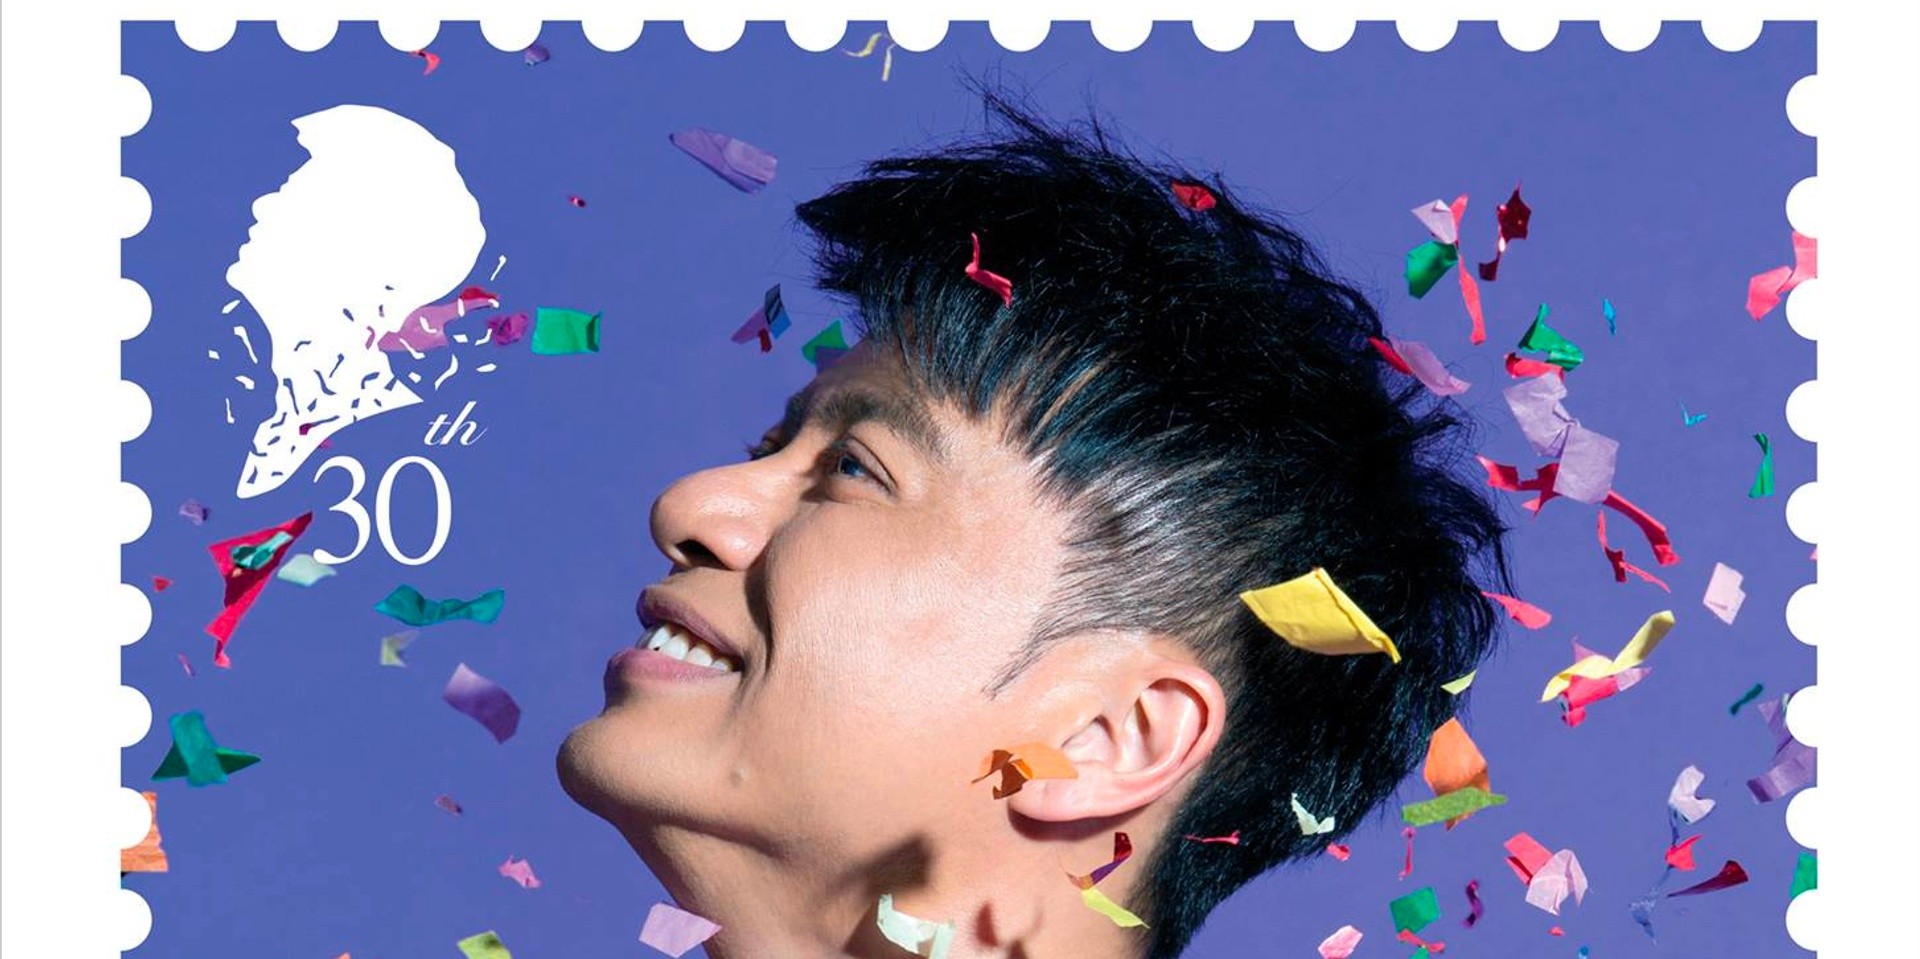 Cantopop star Hacken Lee to hold 30th anniversary concert in Singapore